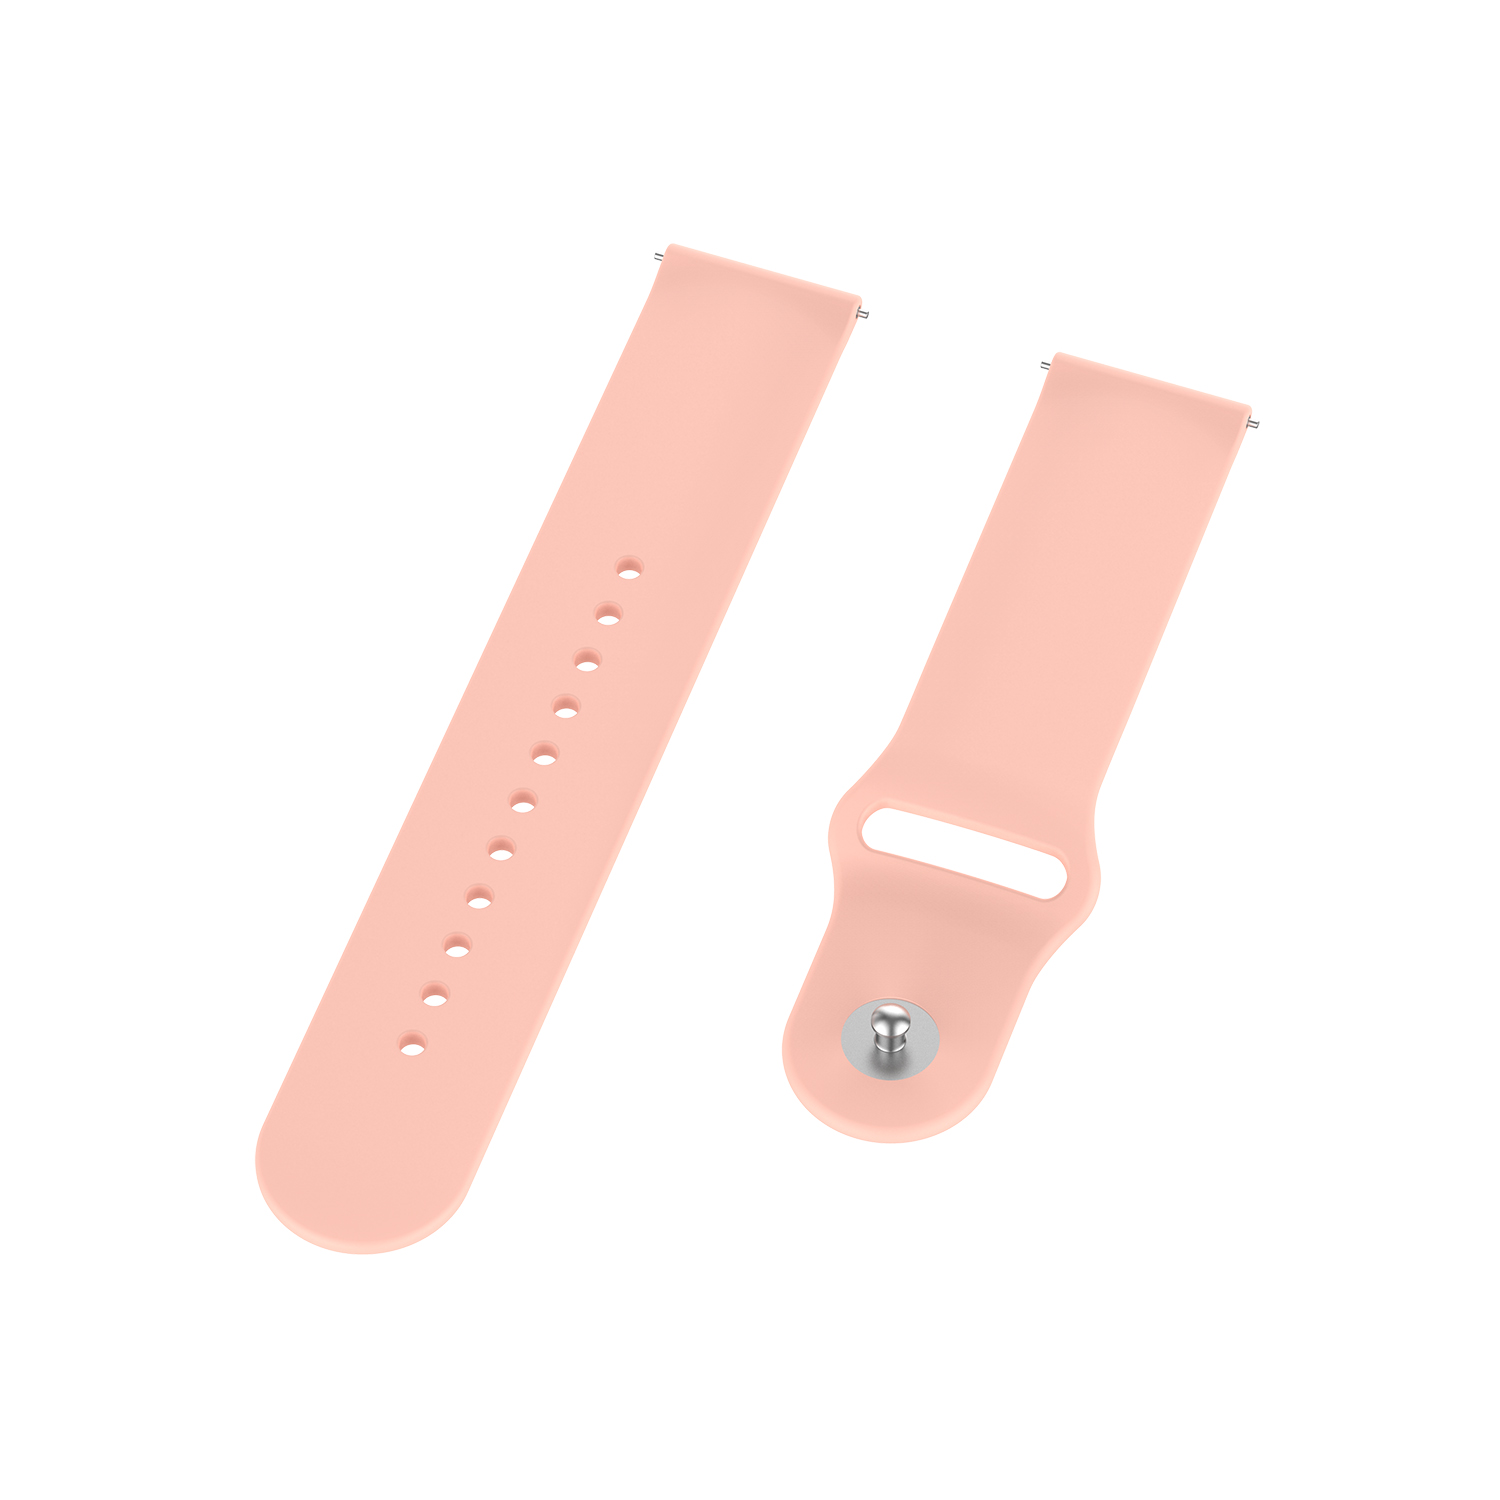 Bakeey-18mm-SLR-Buckle-Silicone-Replacement-Strap-Smart-Watch-Band-For-Ticwatch-C2-Rose-Gold-Version-1739113-10